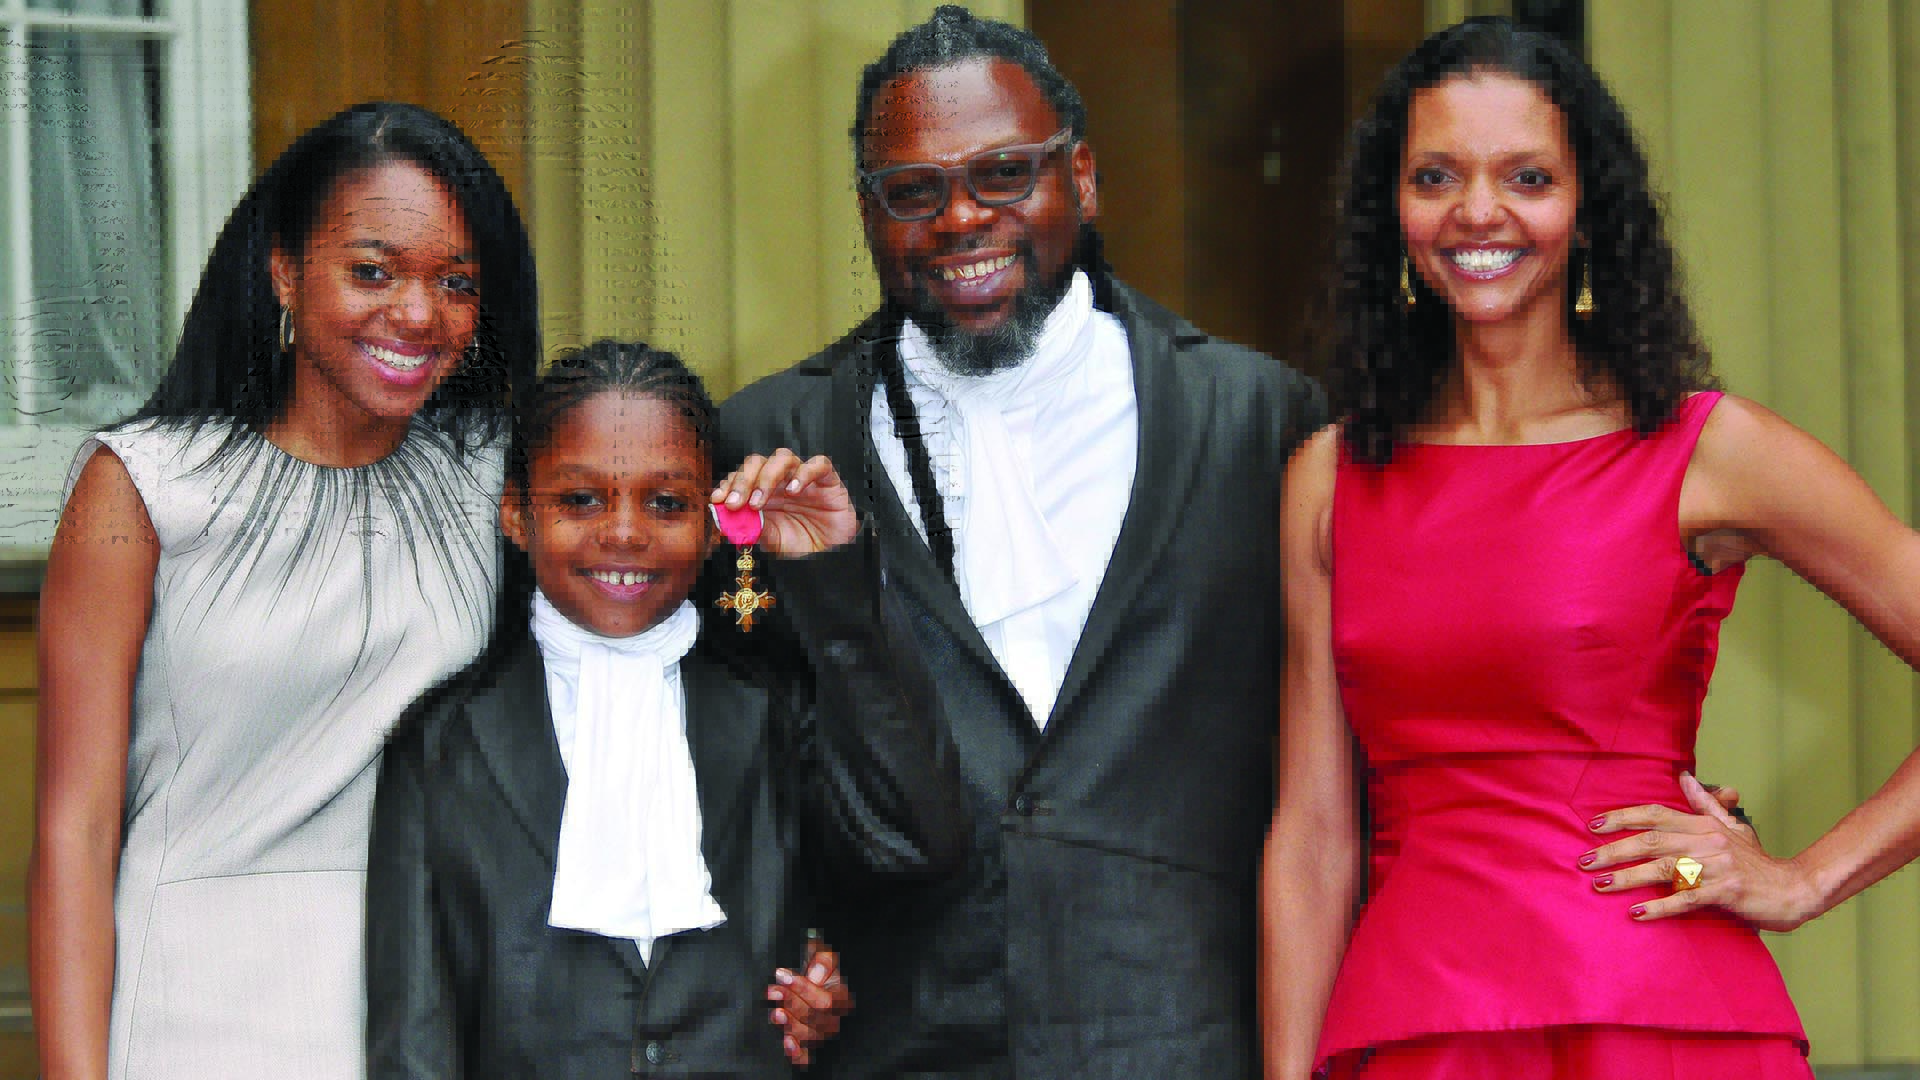 Jazzie B and his family